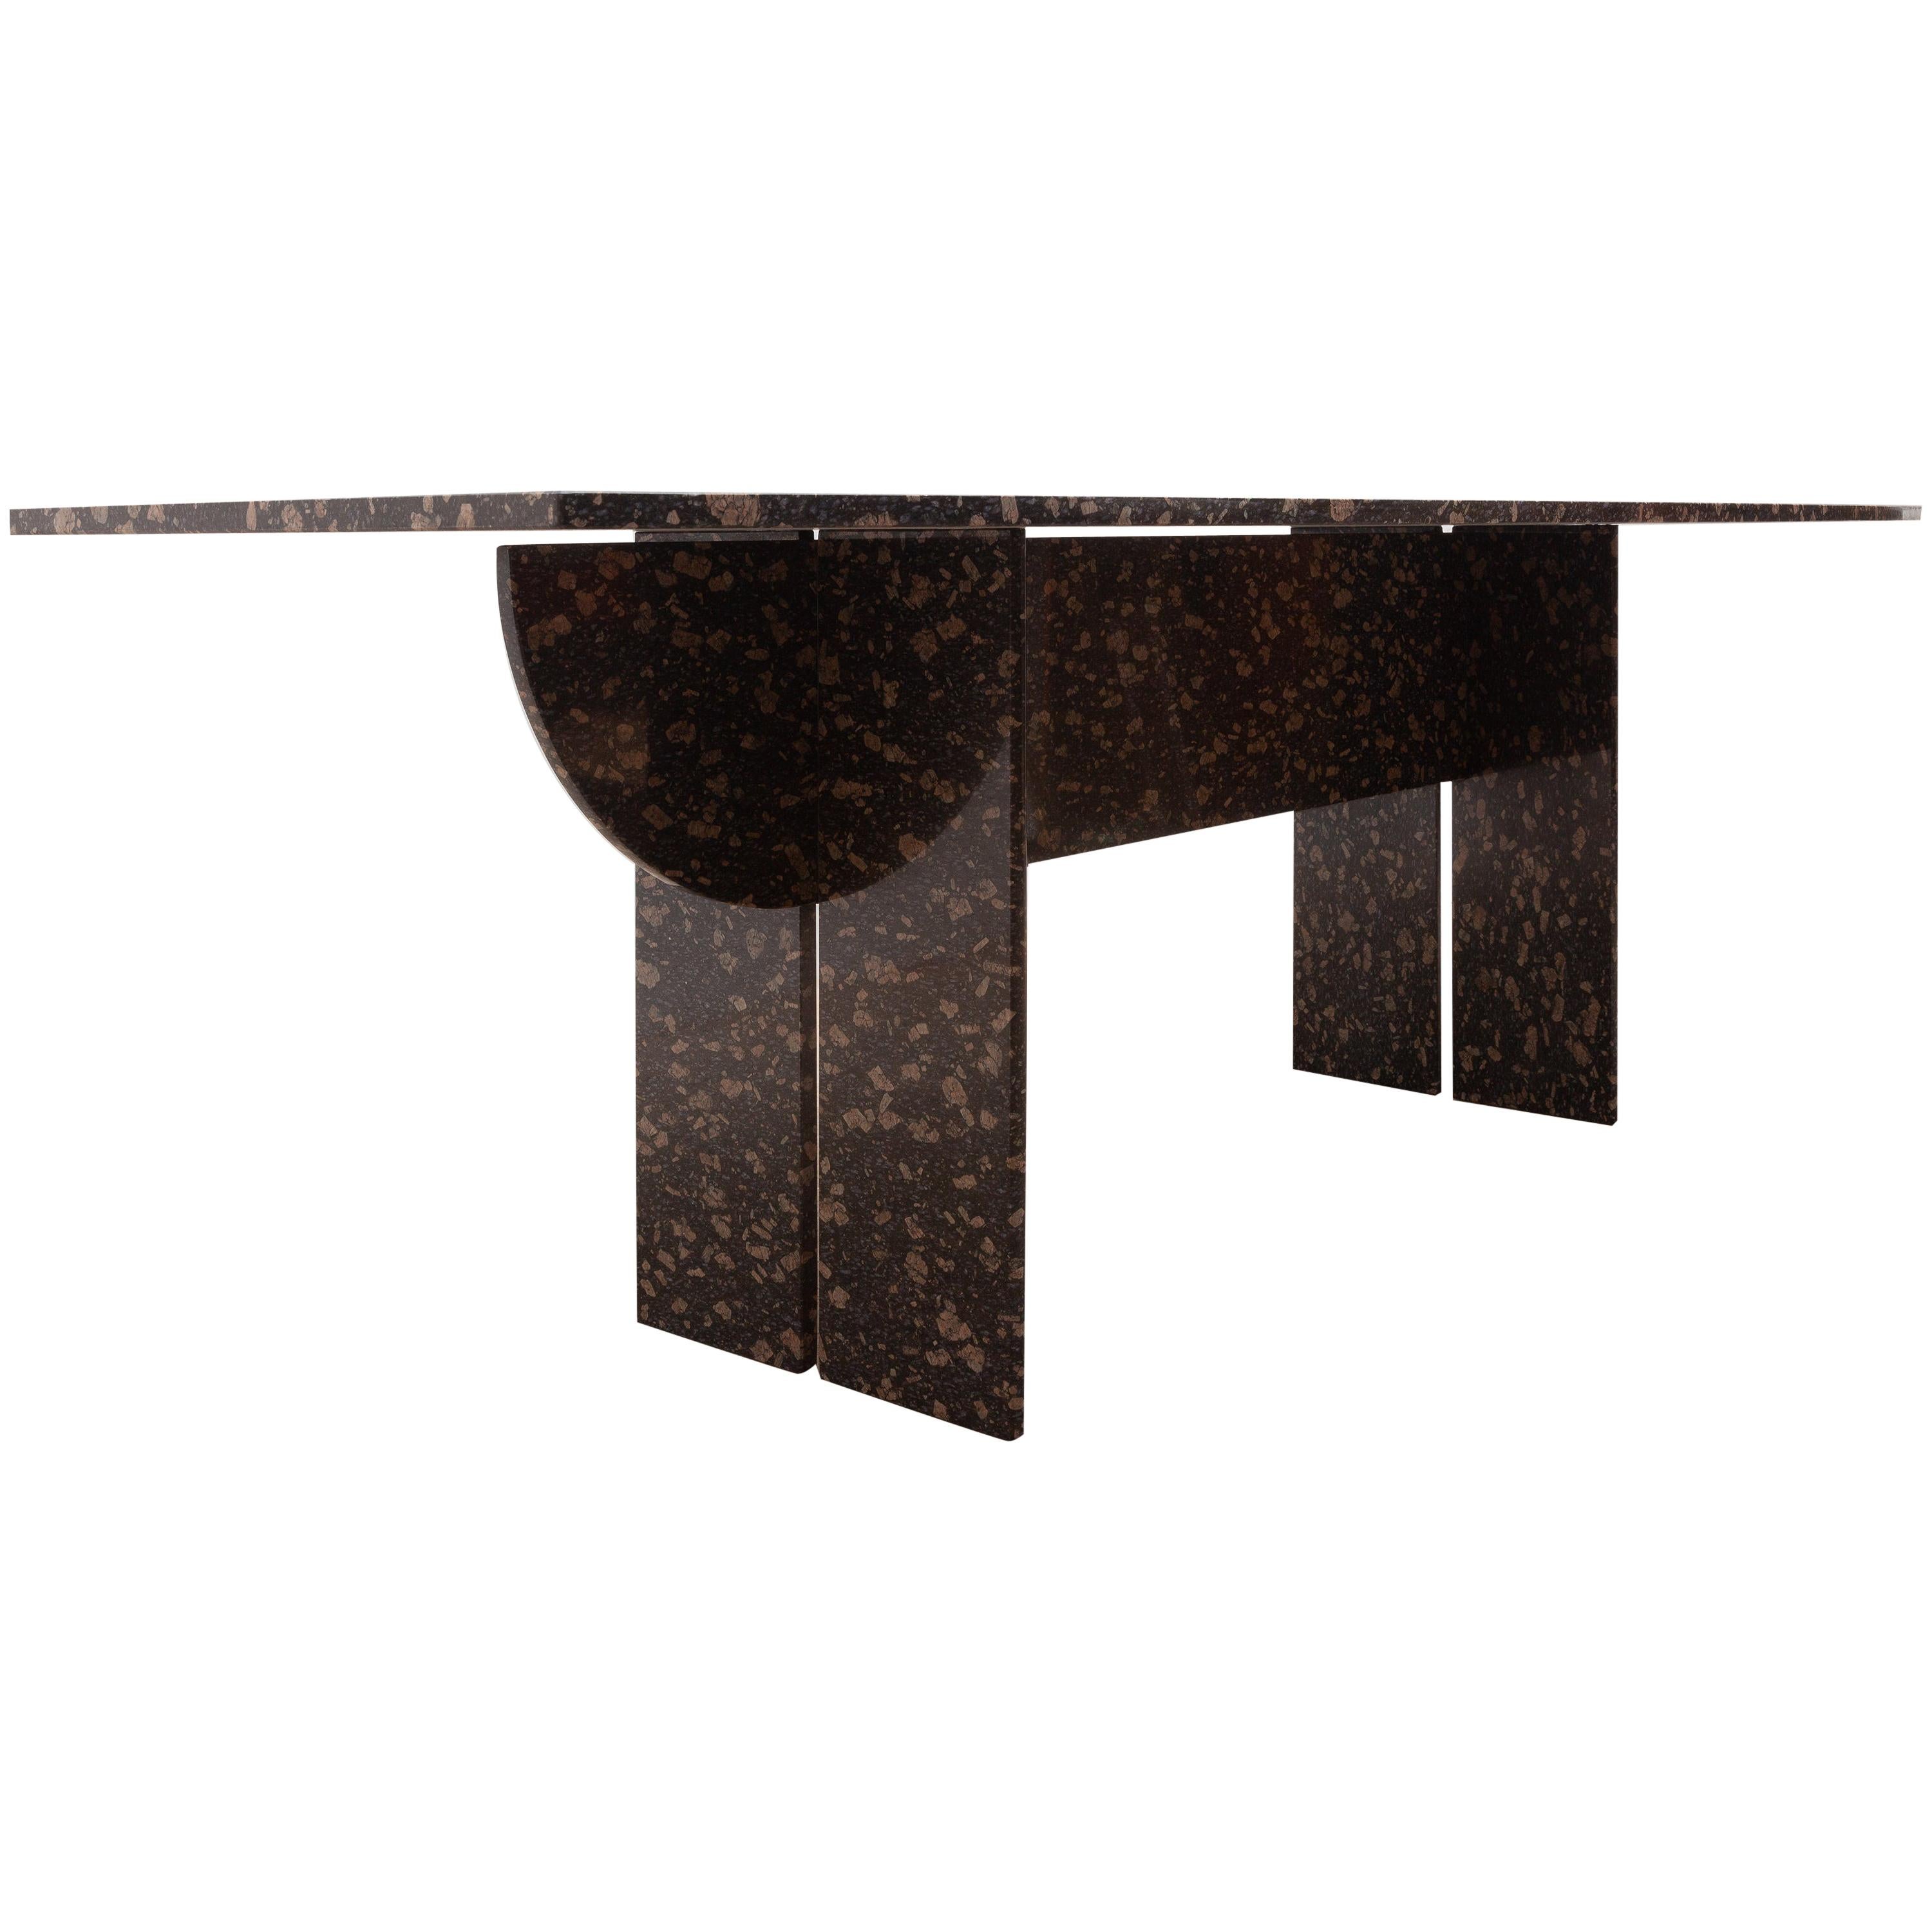 Floating Black and Gold Marble Dining, Conference Table, 1970s, Italy